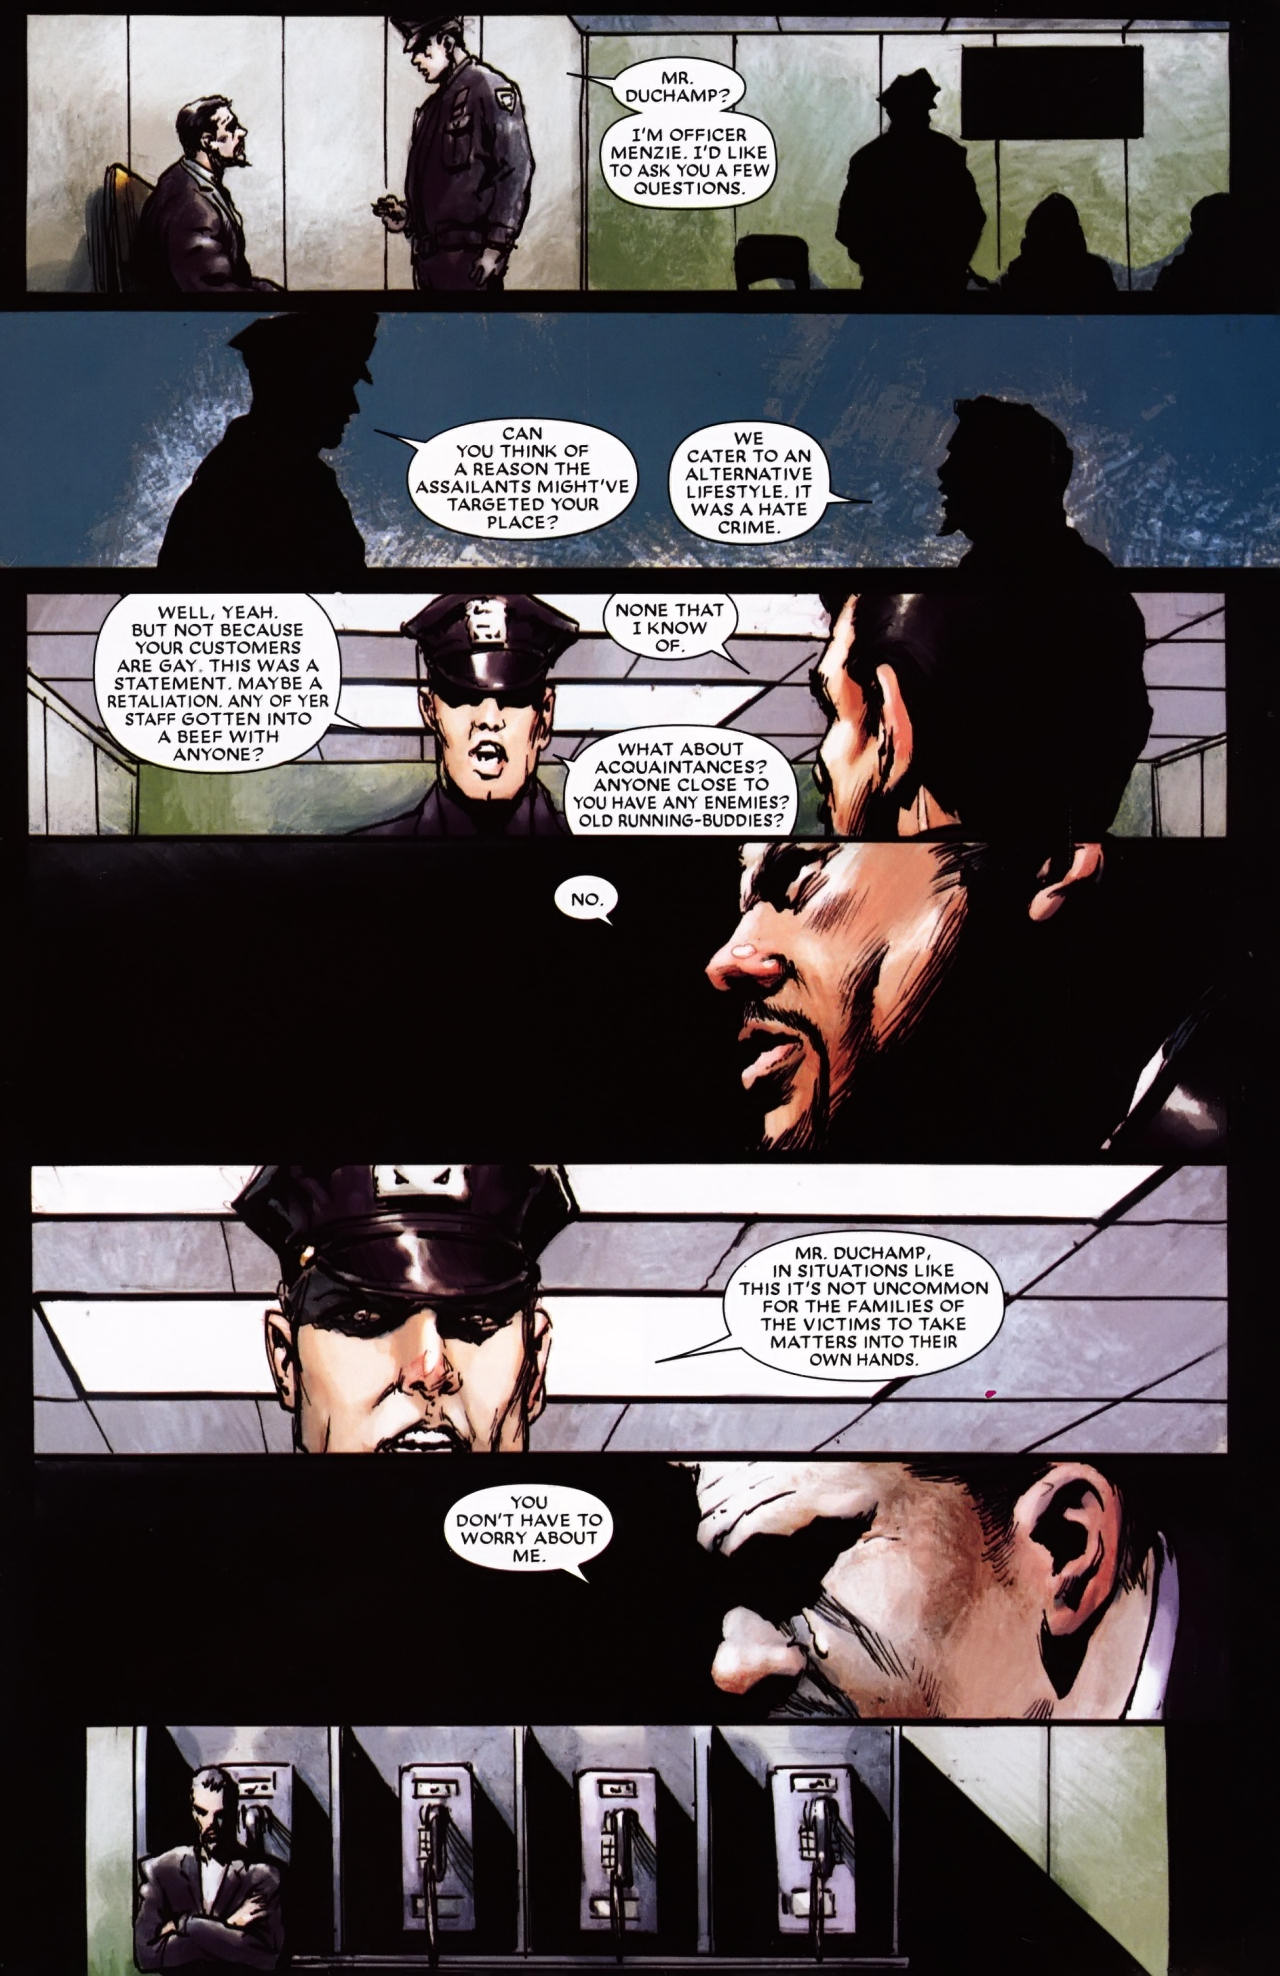 comics - Mr. Duchamp? I'M Officer Menzie. I'D To Ask You A Few Questions Can You Think Of A Reason The Assailants Might'Ve Targeted Your Place? We Cater To An Alternative Lifestyle.It Was A Hate Crime None That I Know Of. Well, Yeah. But Not Because Your 